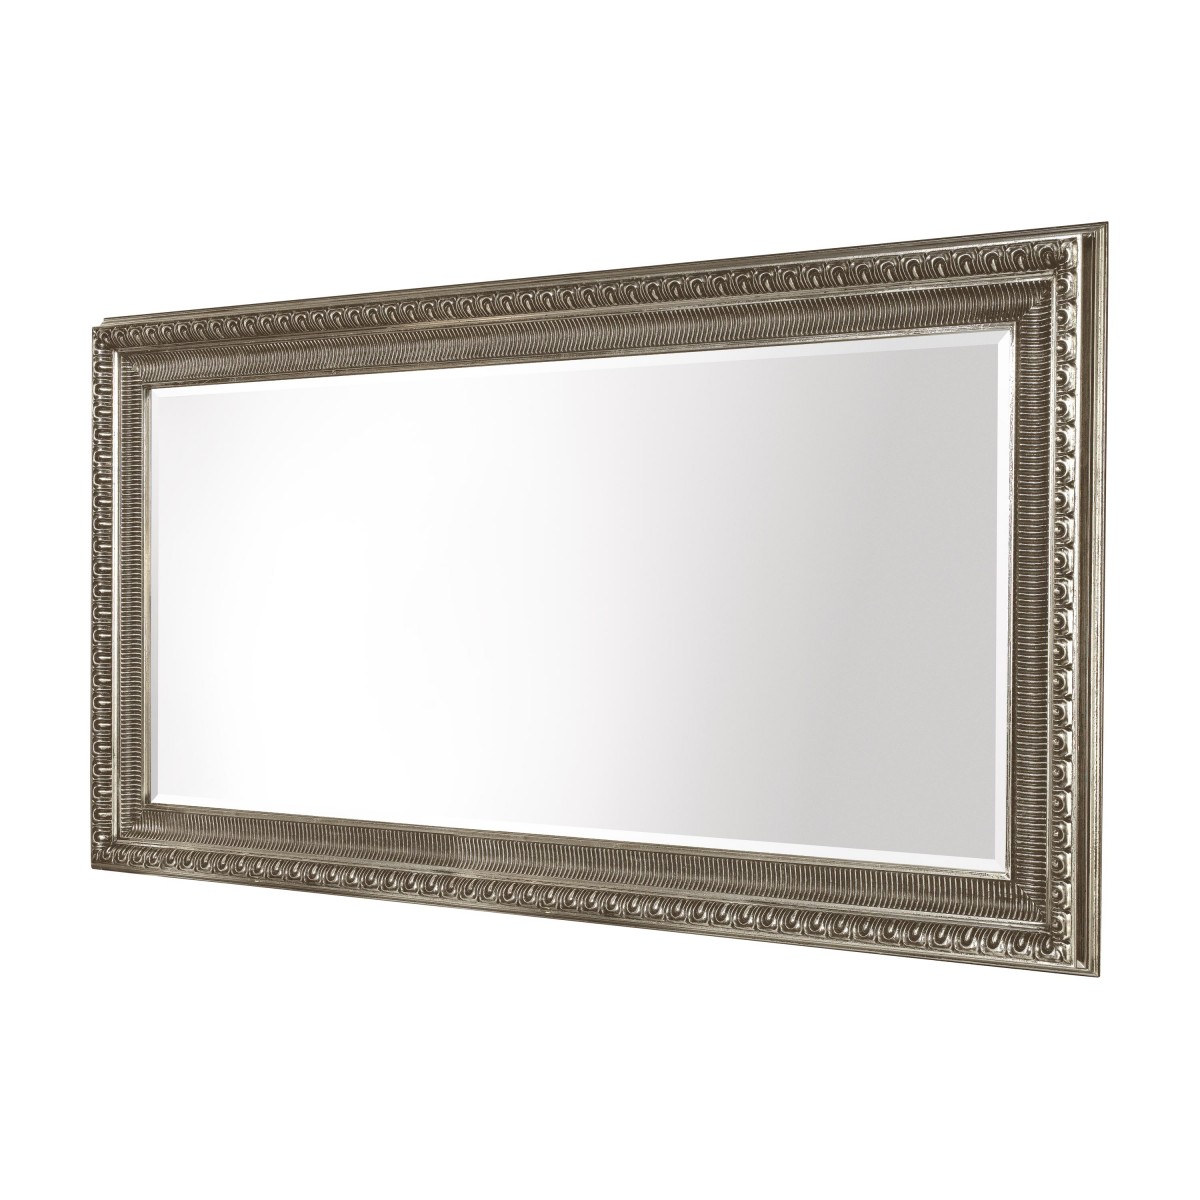 classic style wooden mirror 